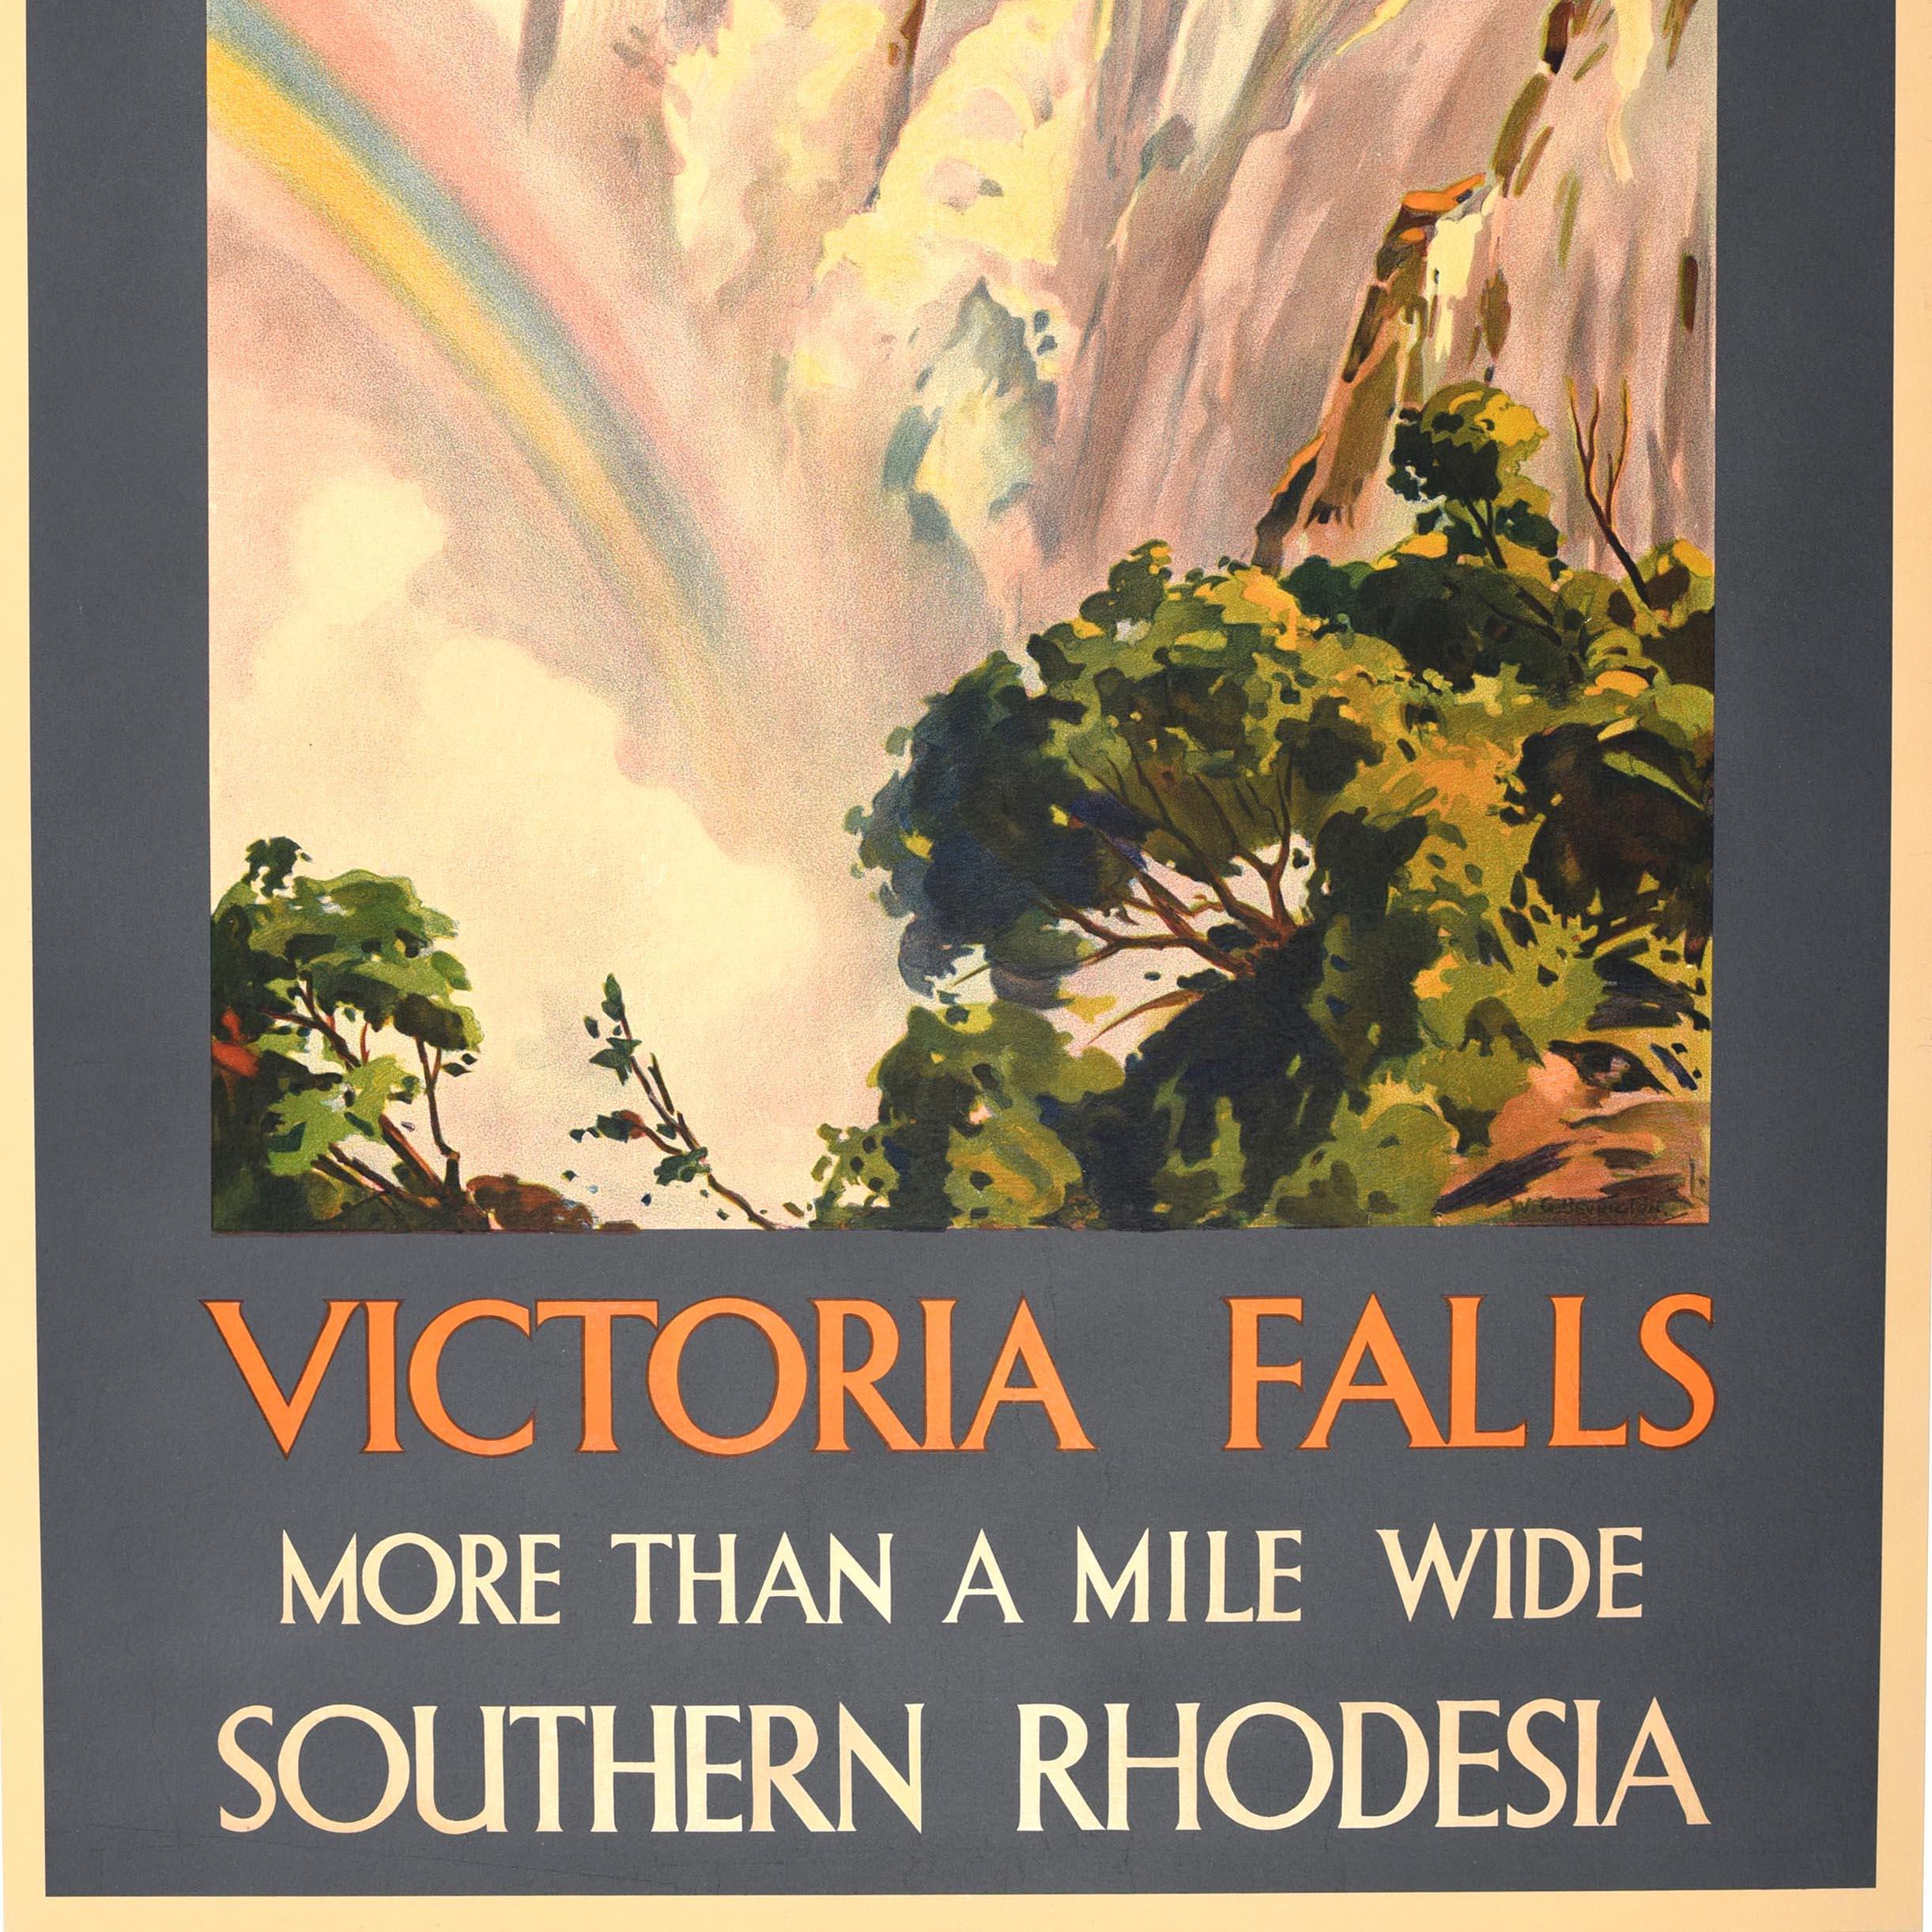 Original Vintage Travel Poster Victoria Falls Waterfall Southern Rhodesia Africa In Good Condition For Sale In London, GB